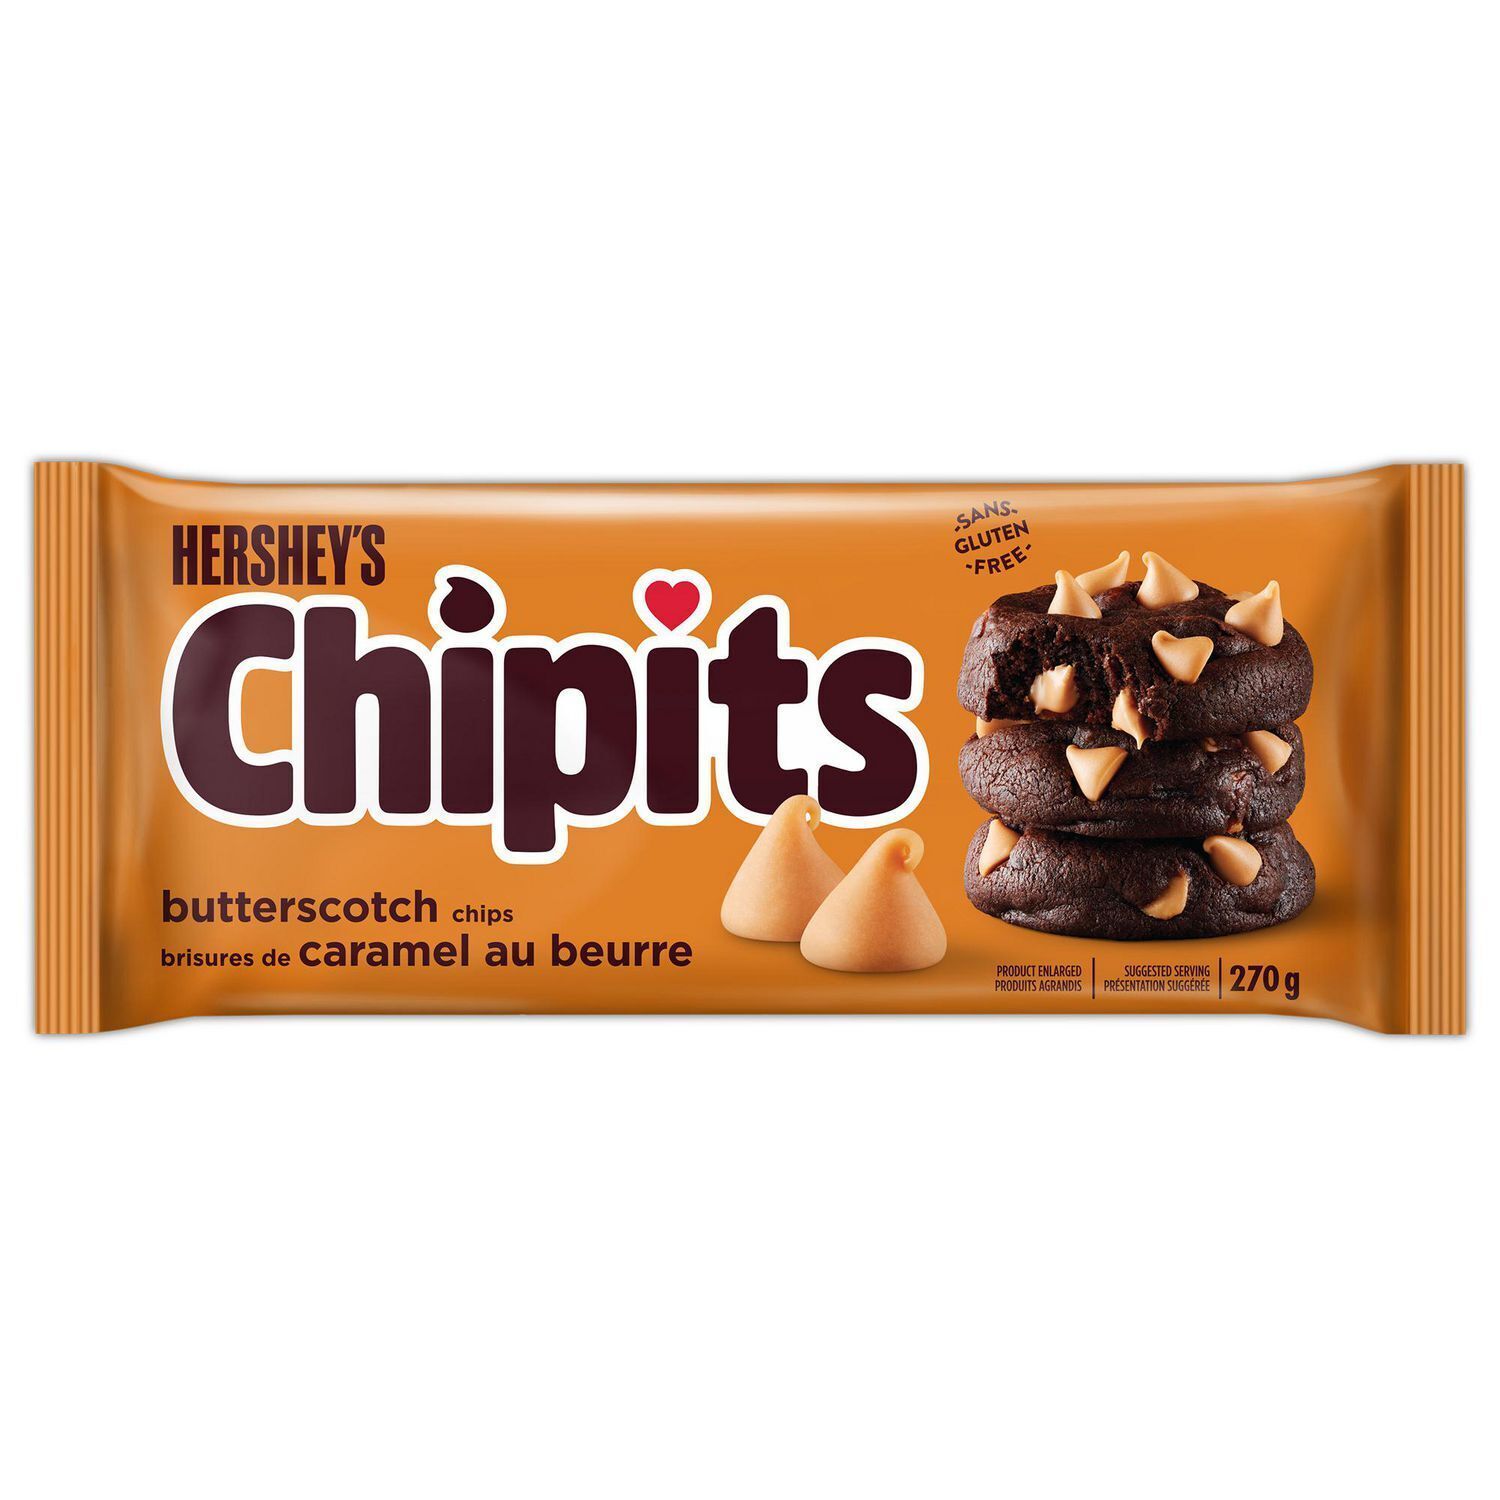 4 Bag of Hershey's Chipits Butterscotch Baking Chips 200g Each - Free Shipping - $35.80